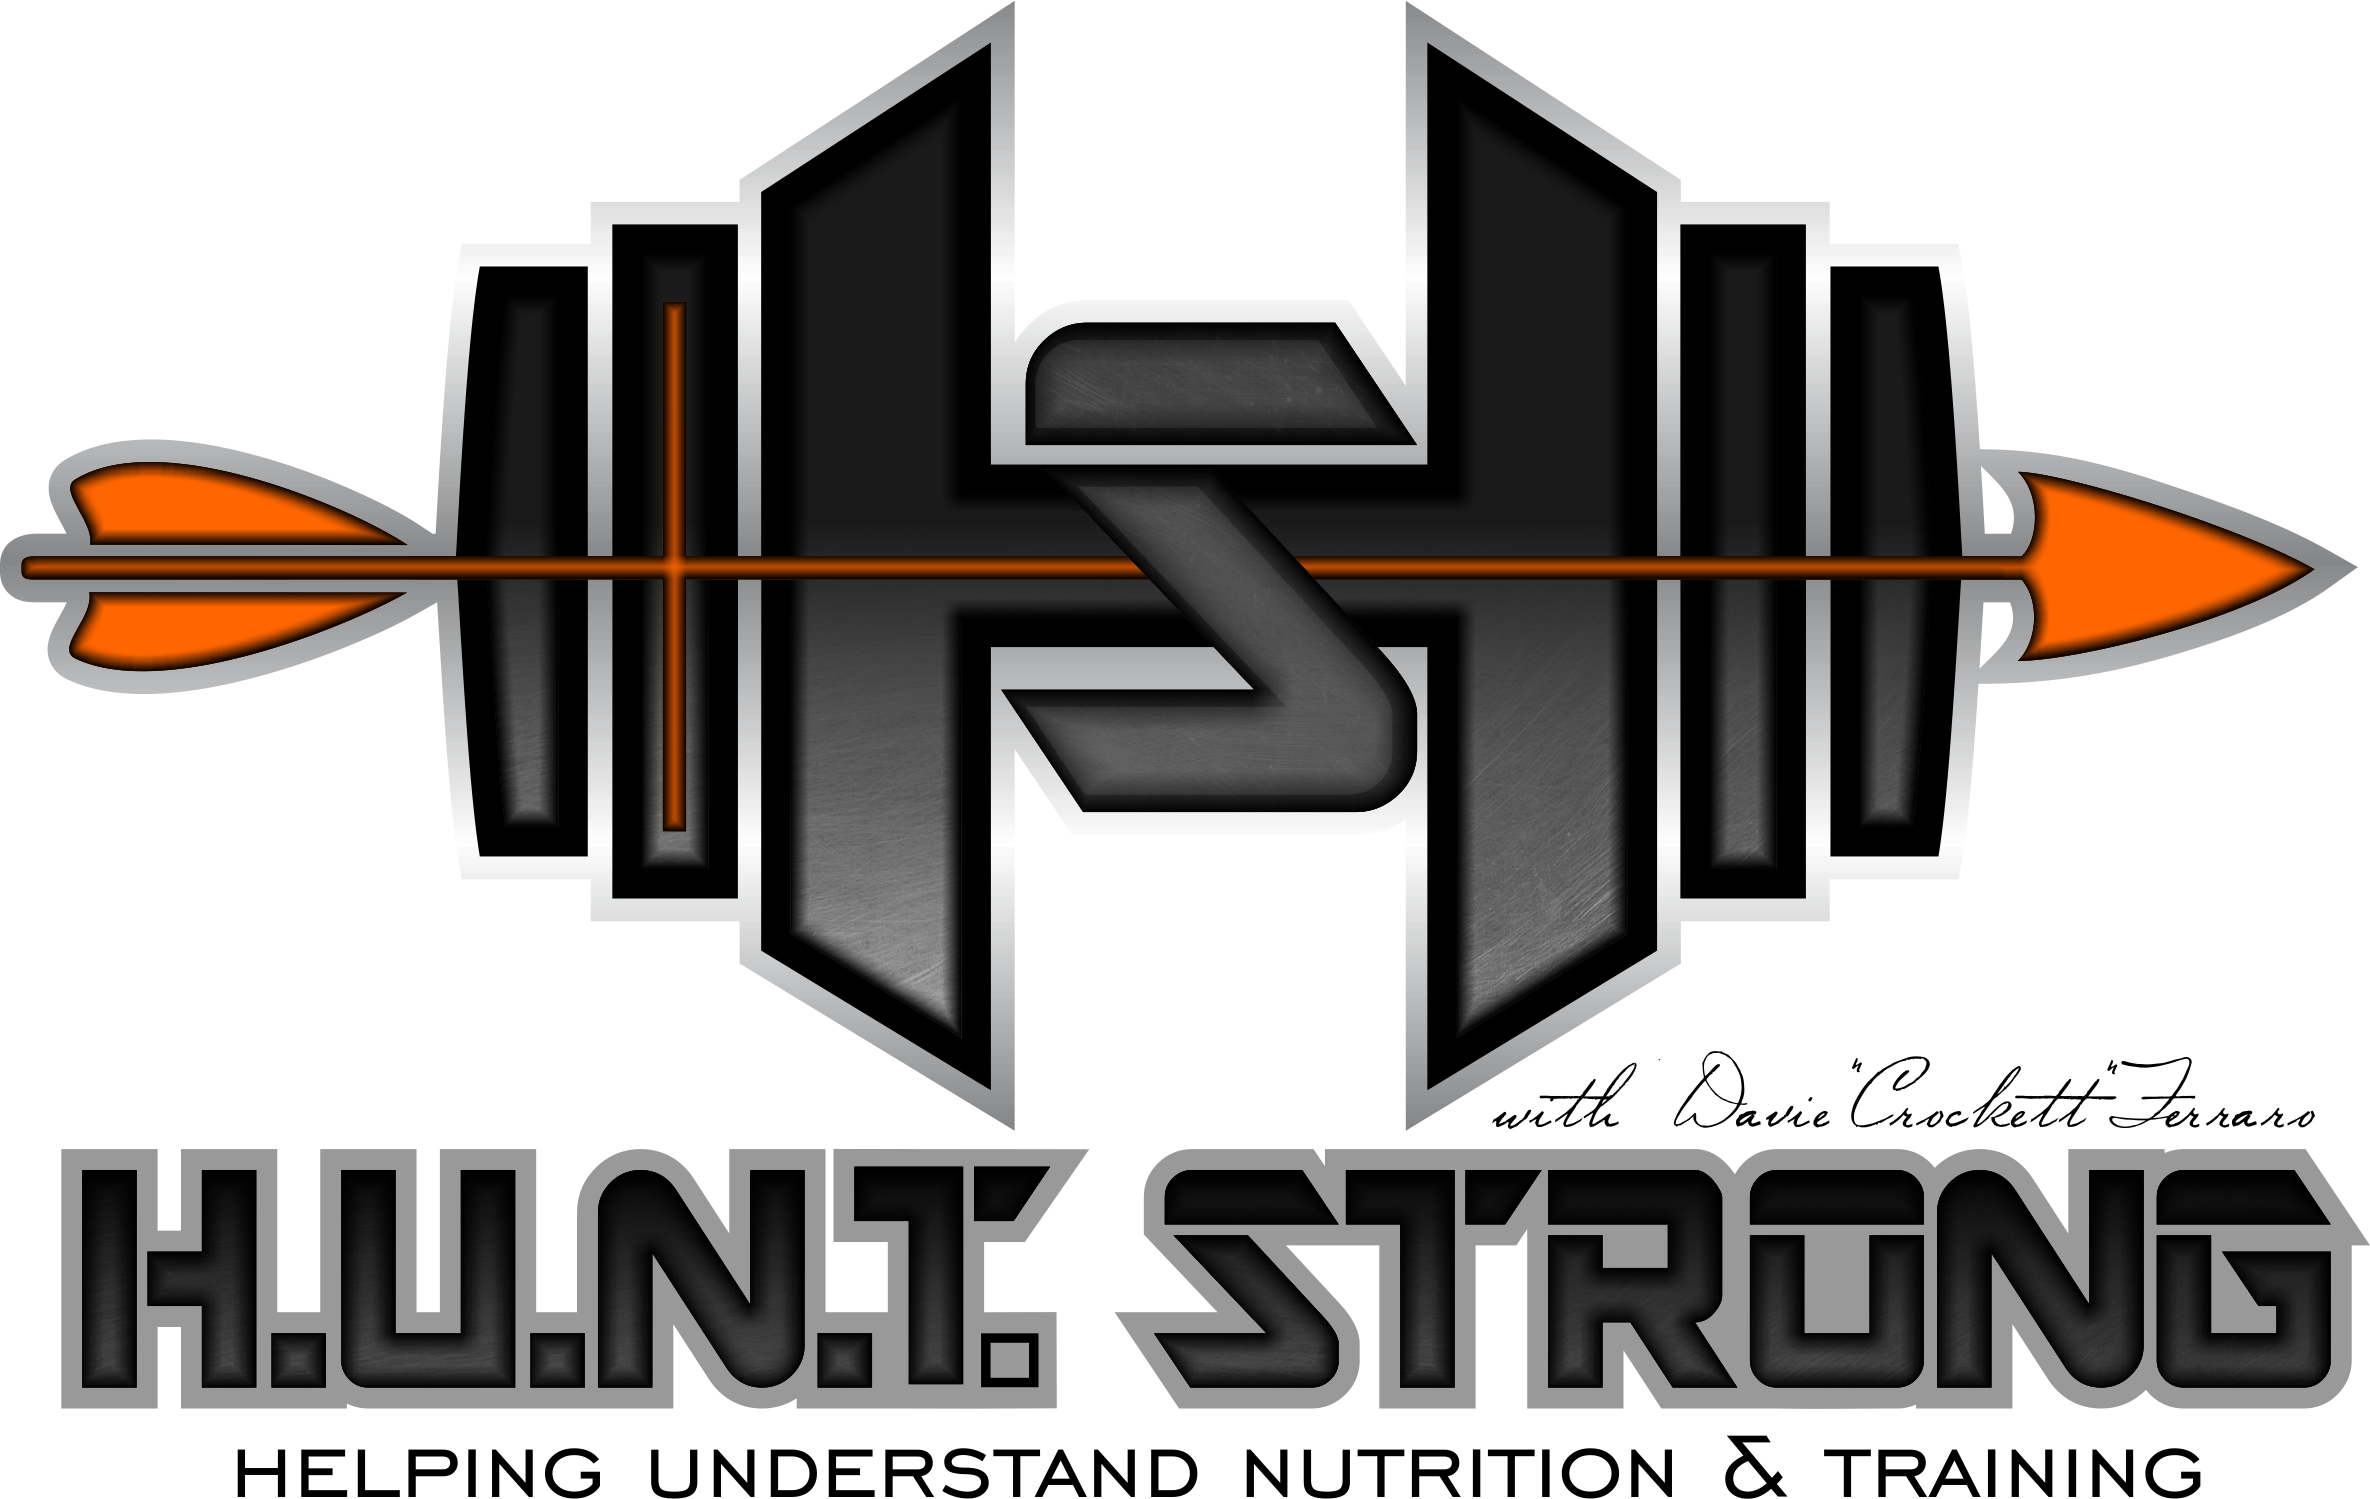 About Hunt Strong